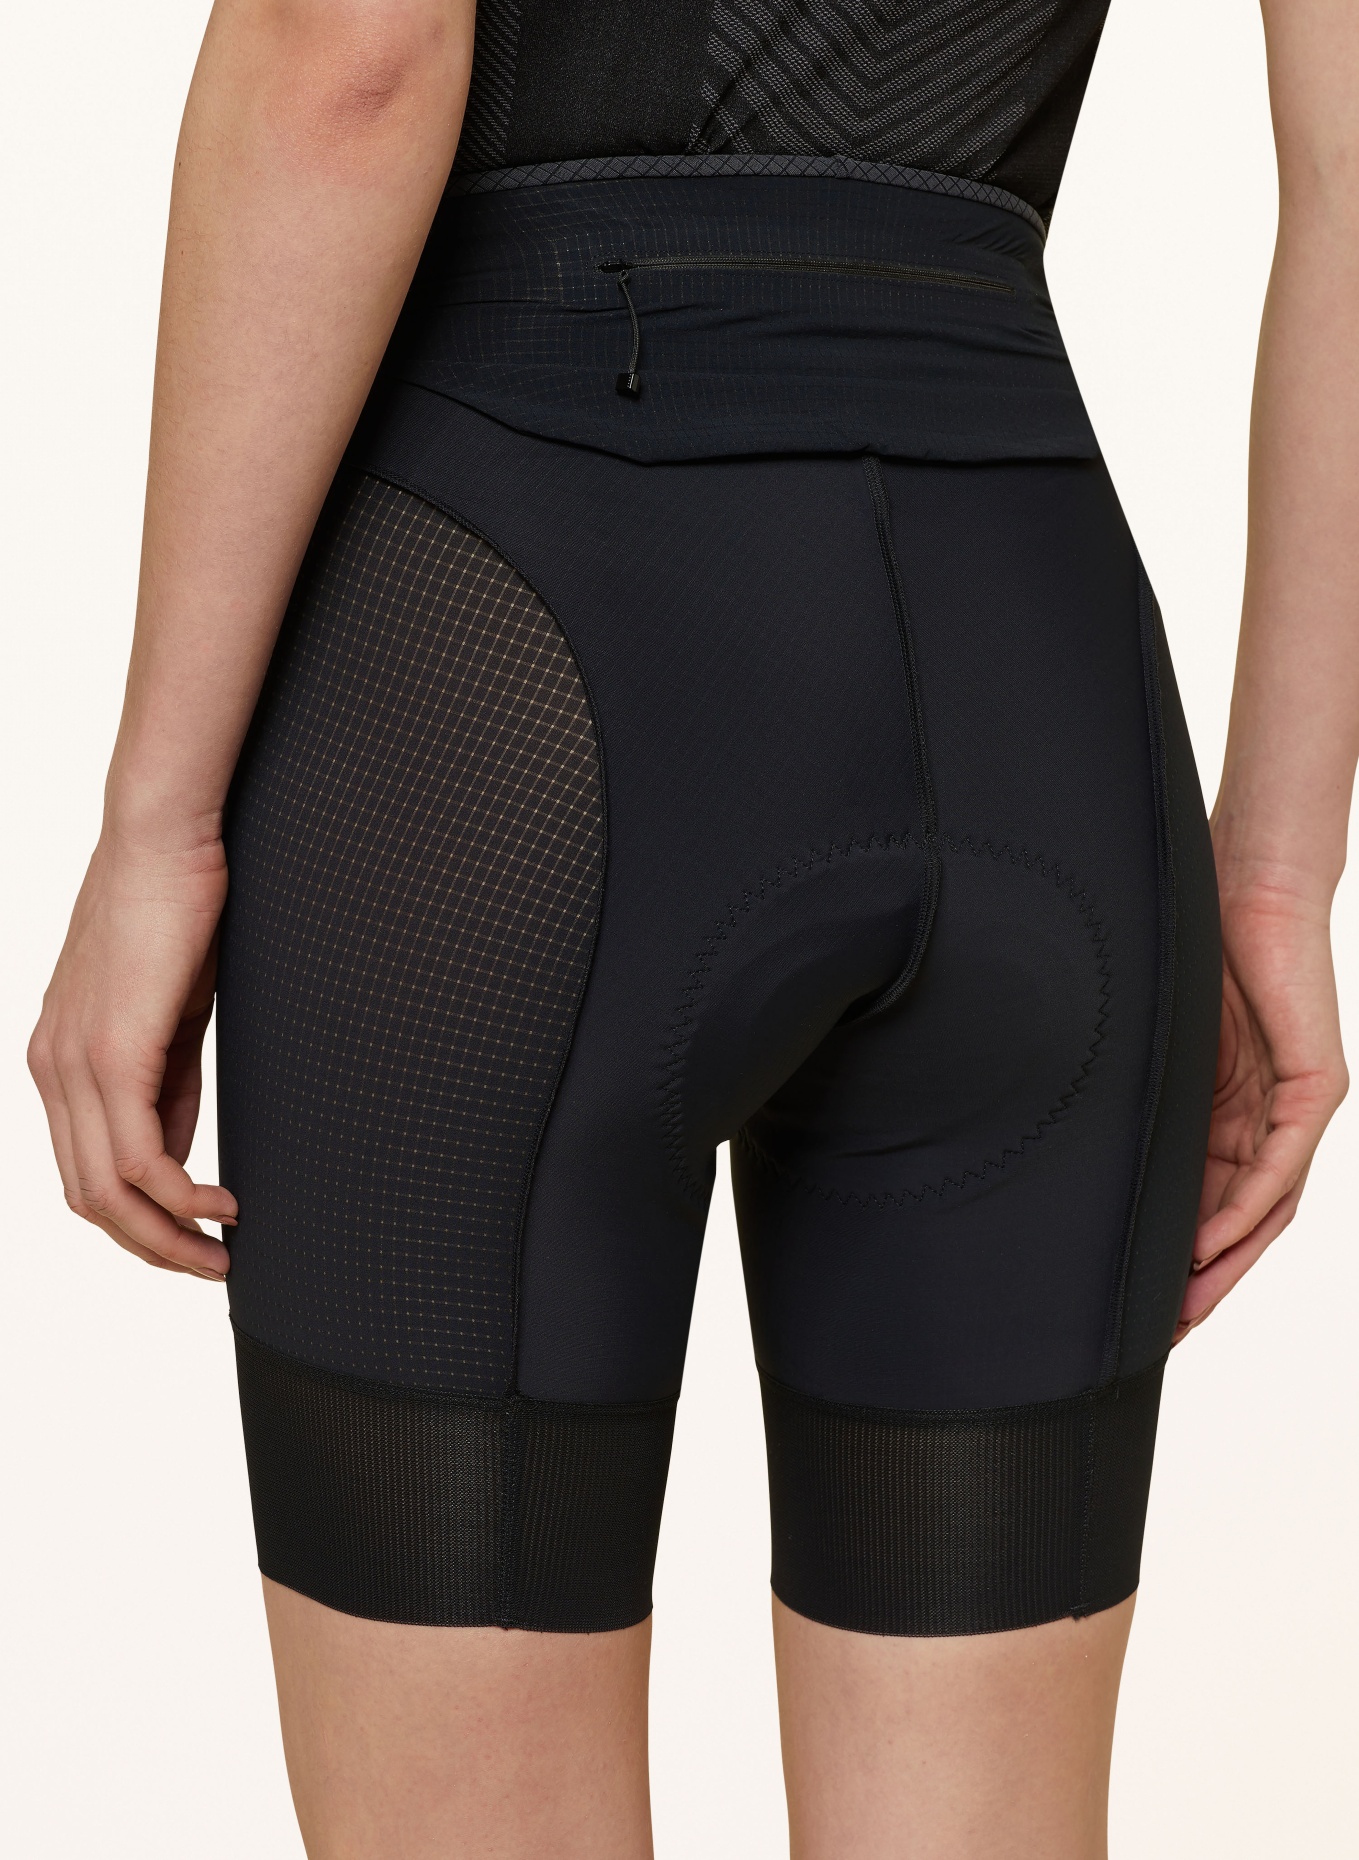 SPECIALIZED Cycling undershorts PRIME SWAT LINER with padded insert, Color: BLACK (Image 5)